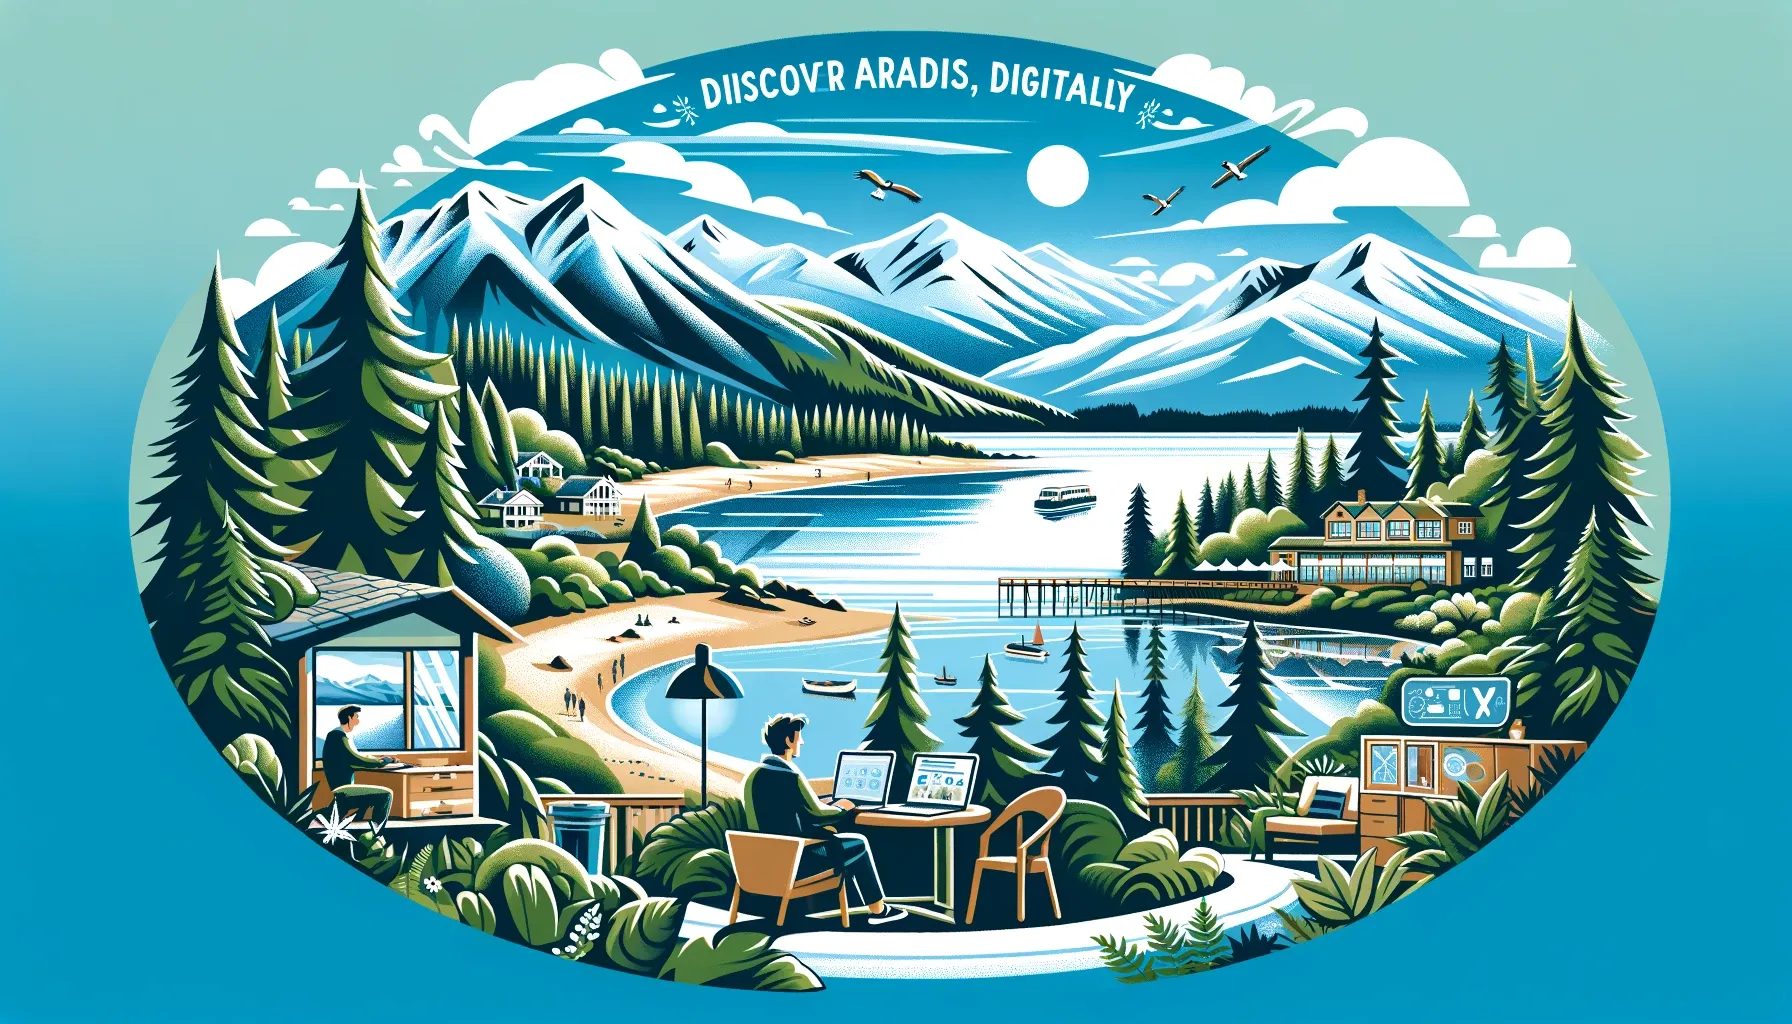 Ilikecomox: Your One-Stop Destination for Digital Needs and Coastal Bliss